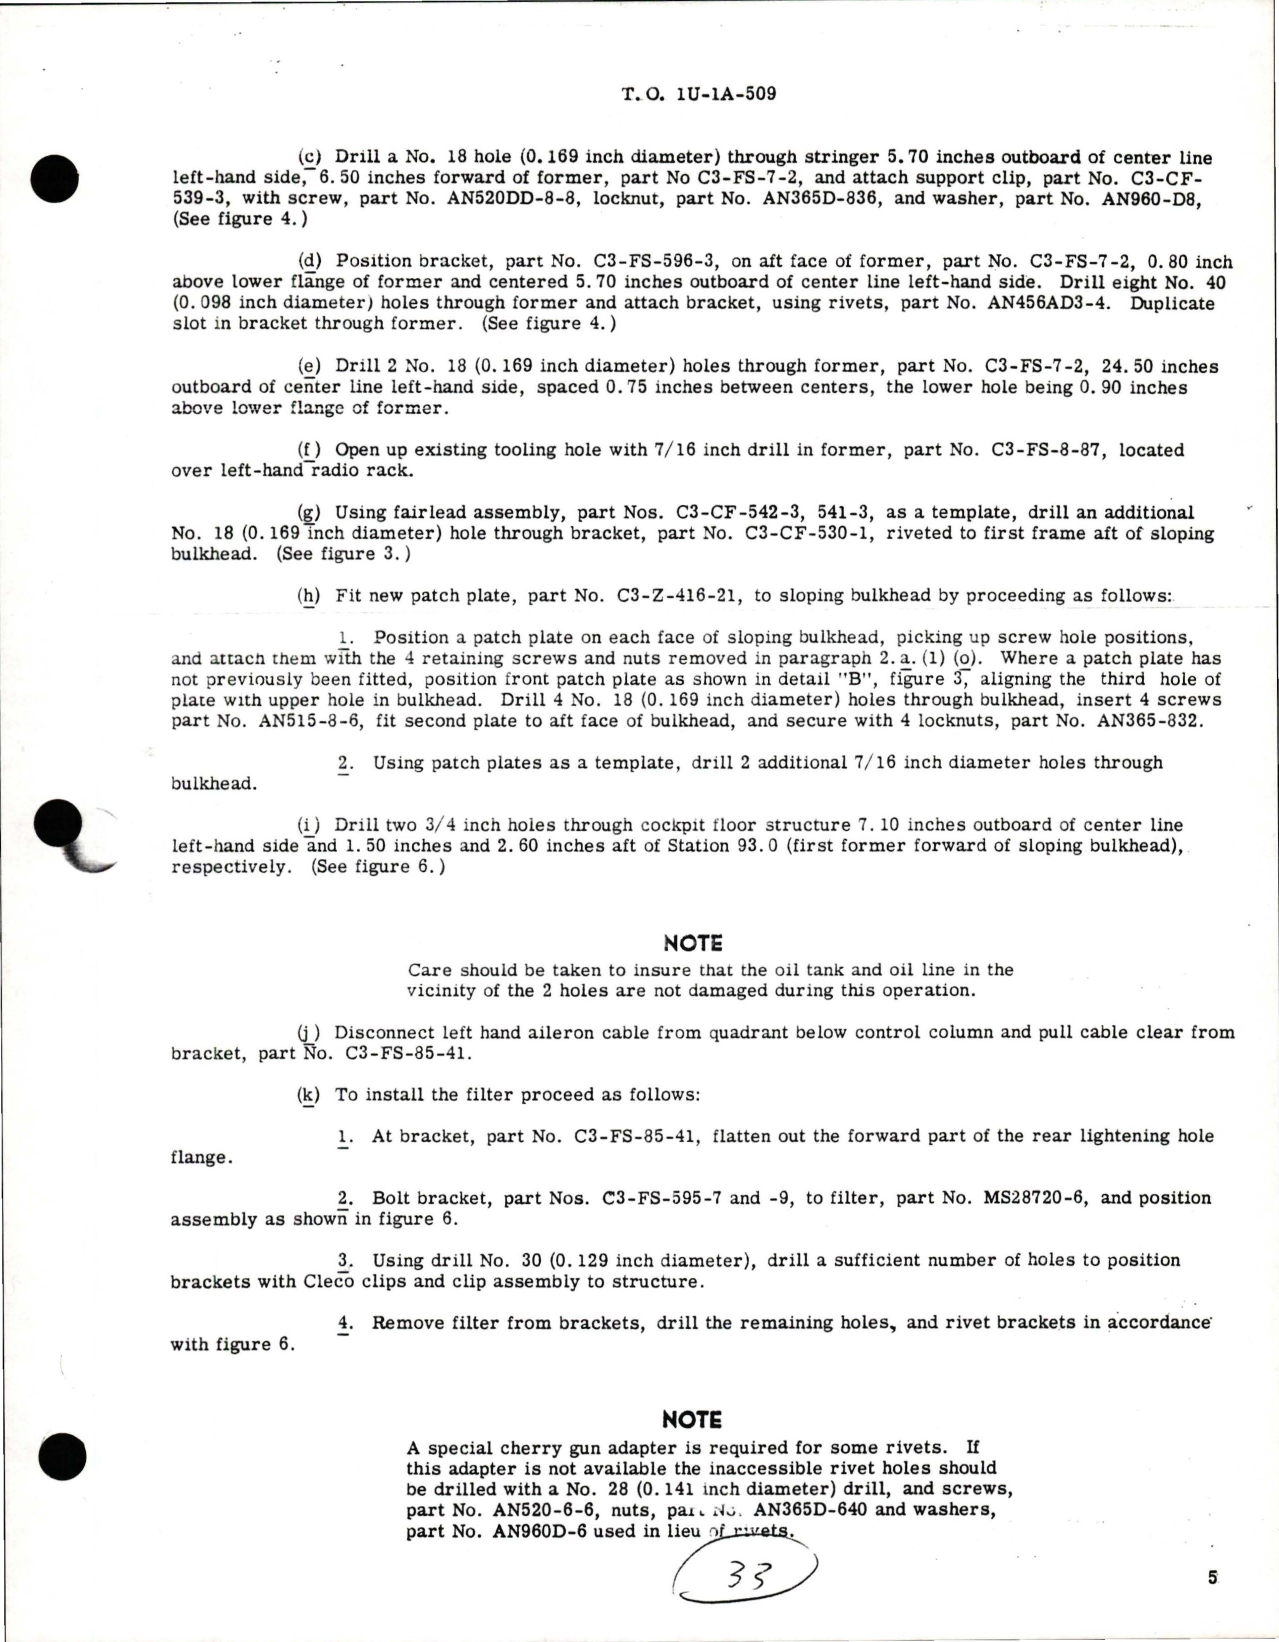 Sample page 5 from AirCorps Library document: Modification of Flap Hydraulic System for U-1A and YU-1